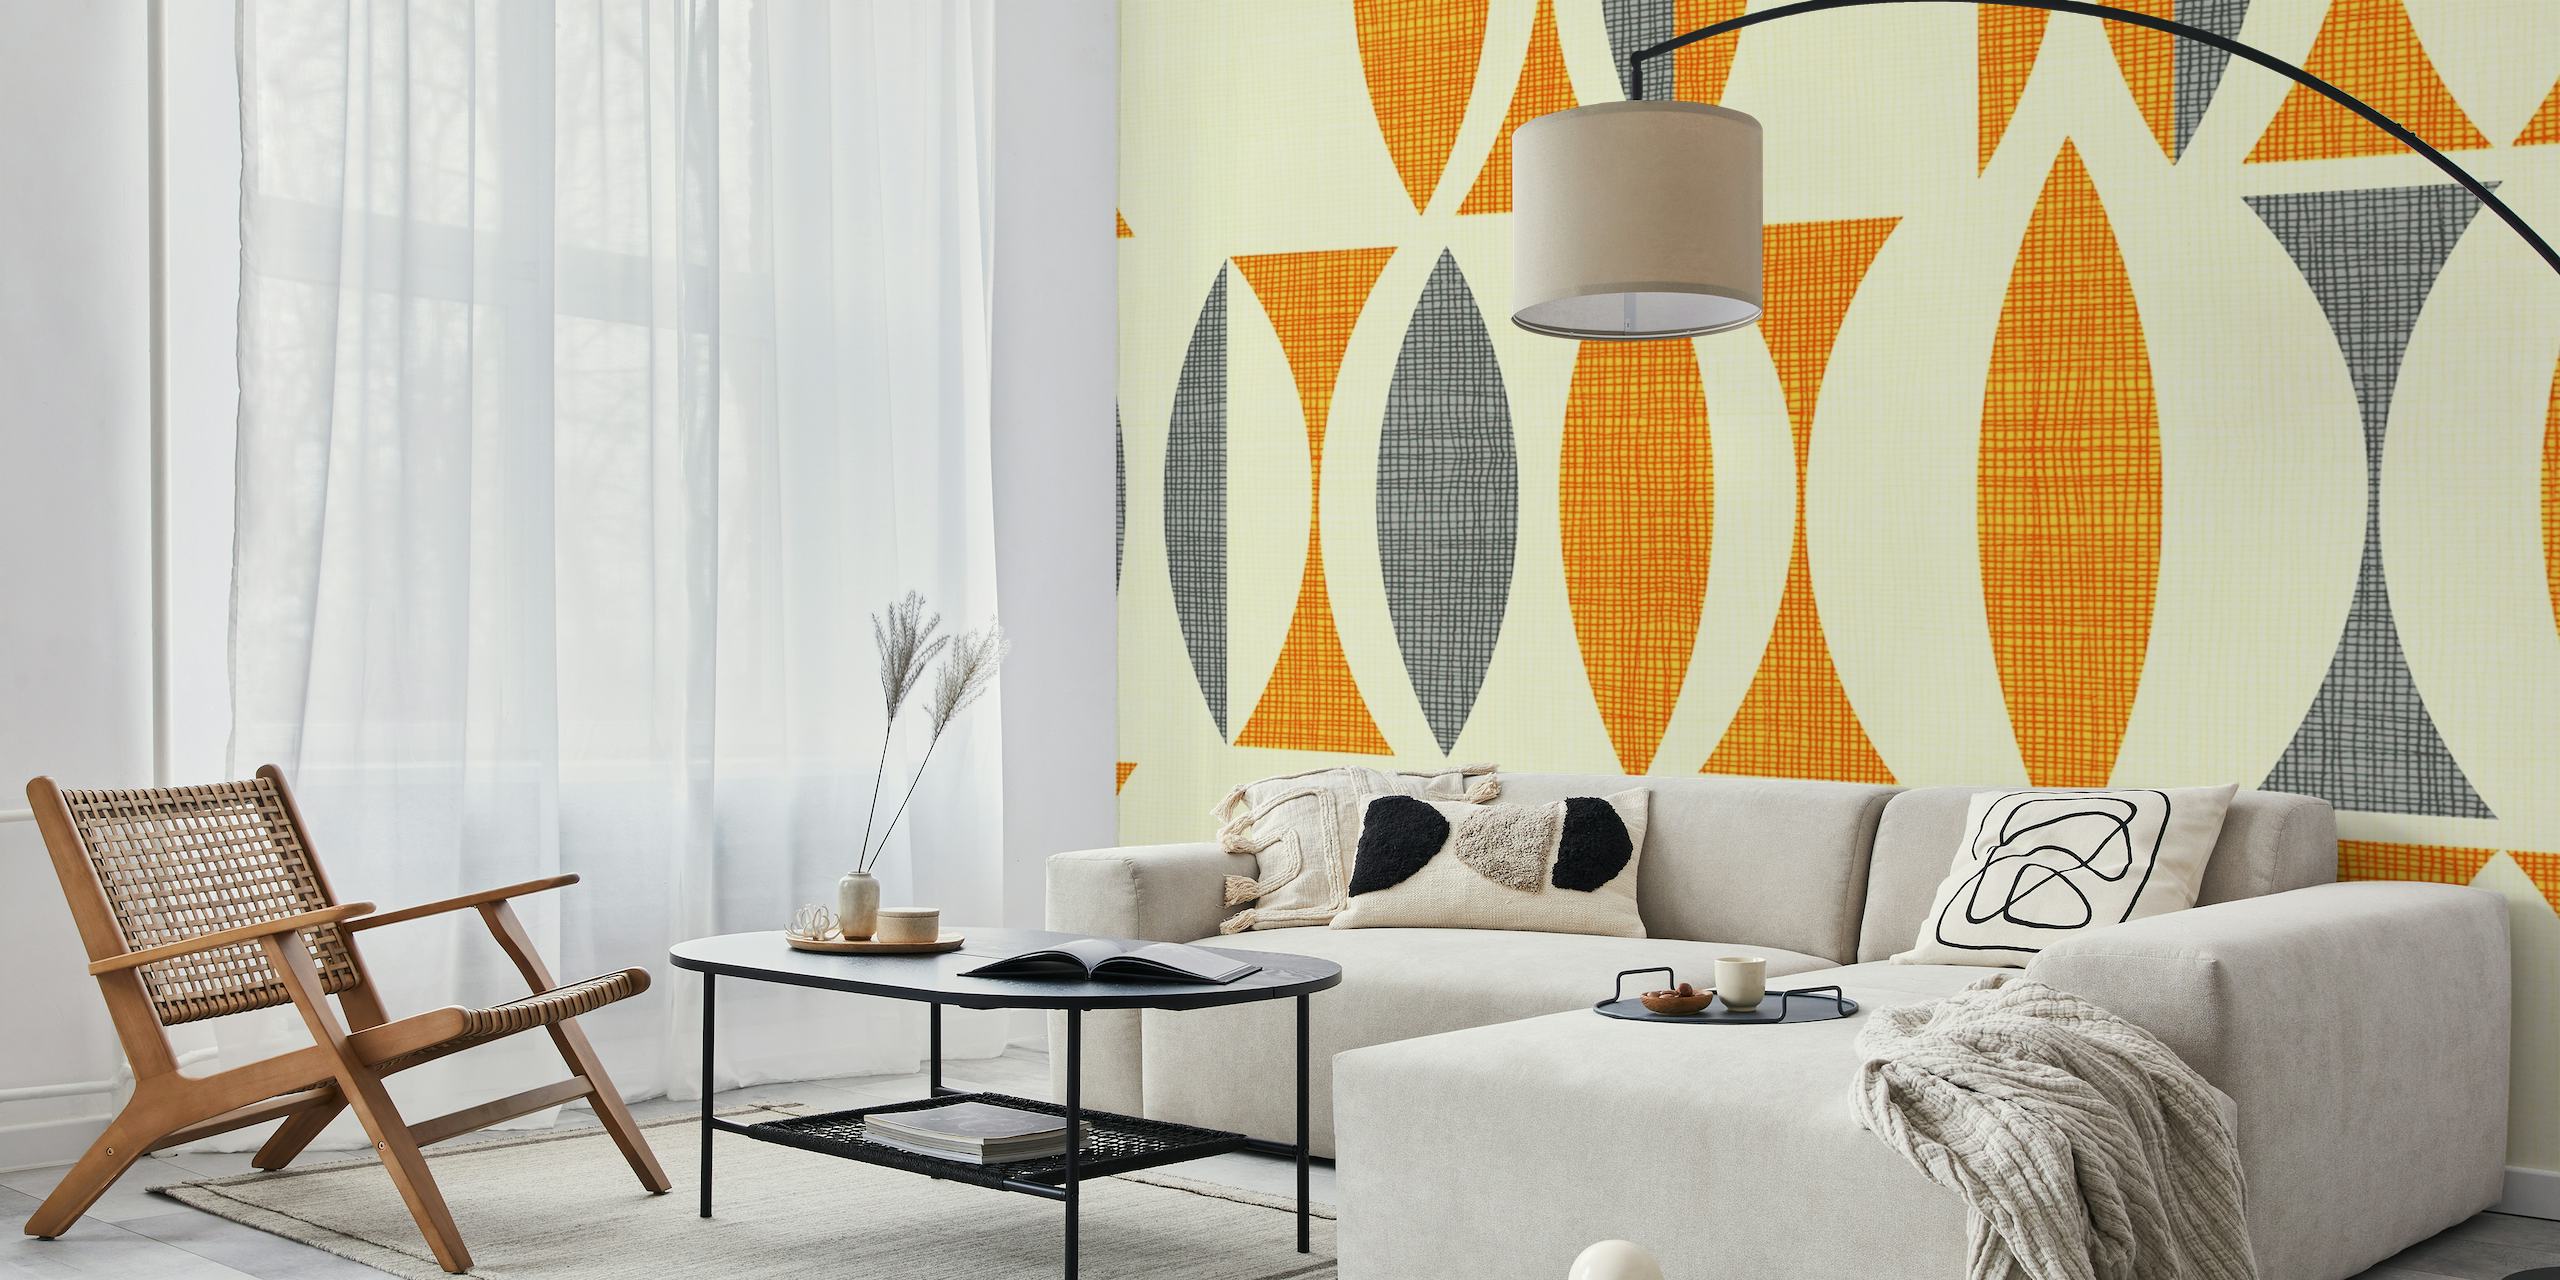 Vintage orange, grey, and cream leaf-like patterned wall mural 'Field in Color'.